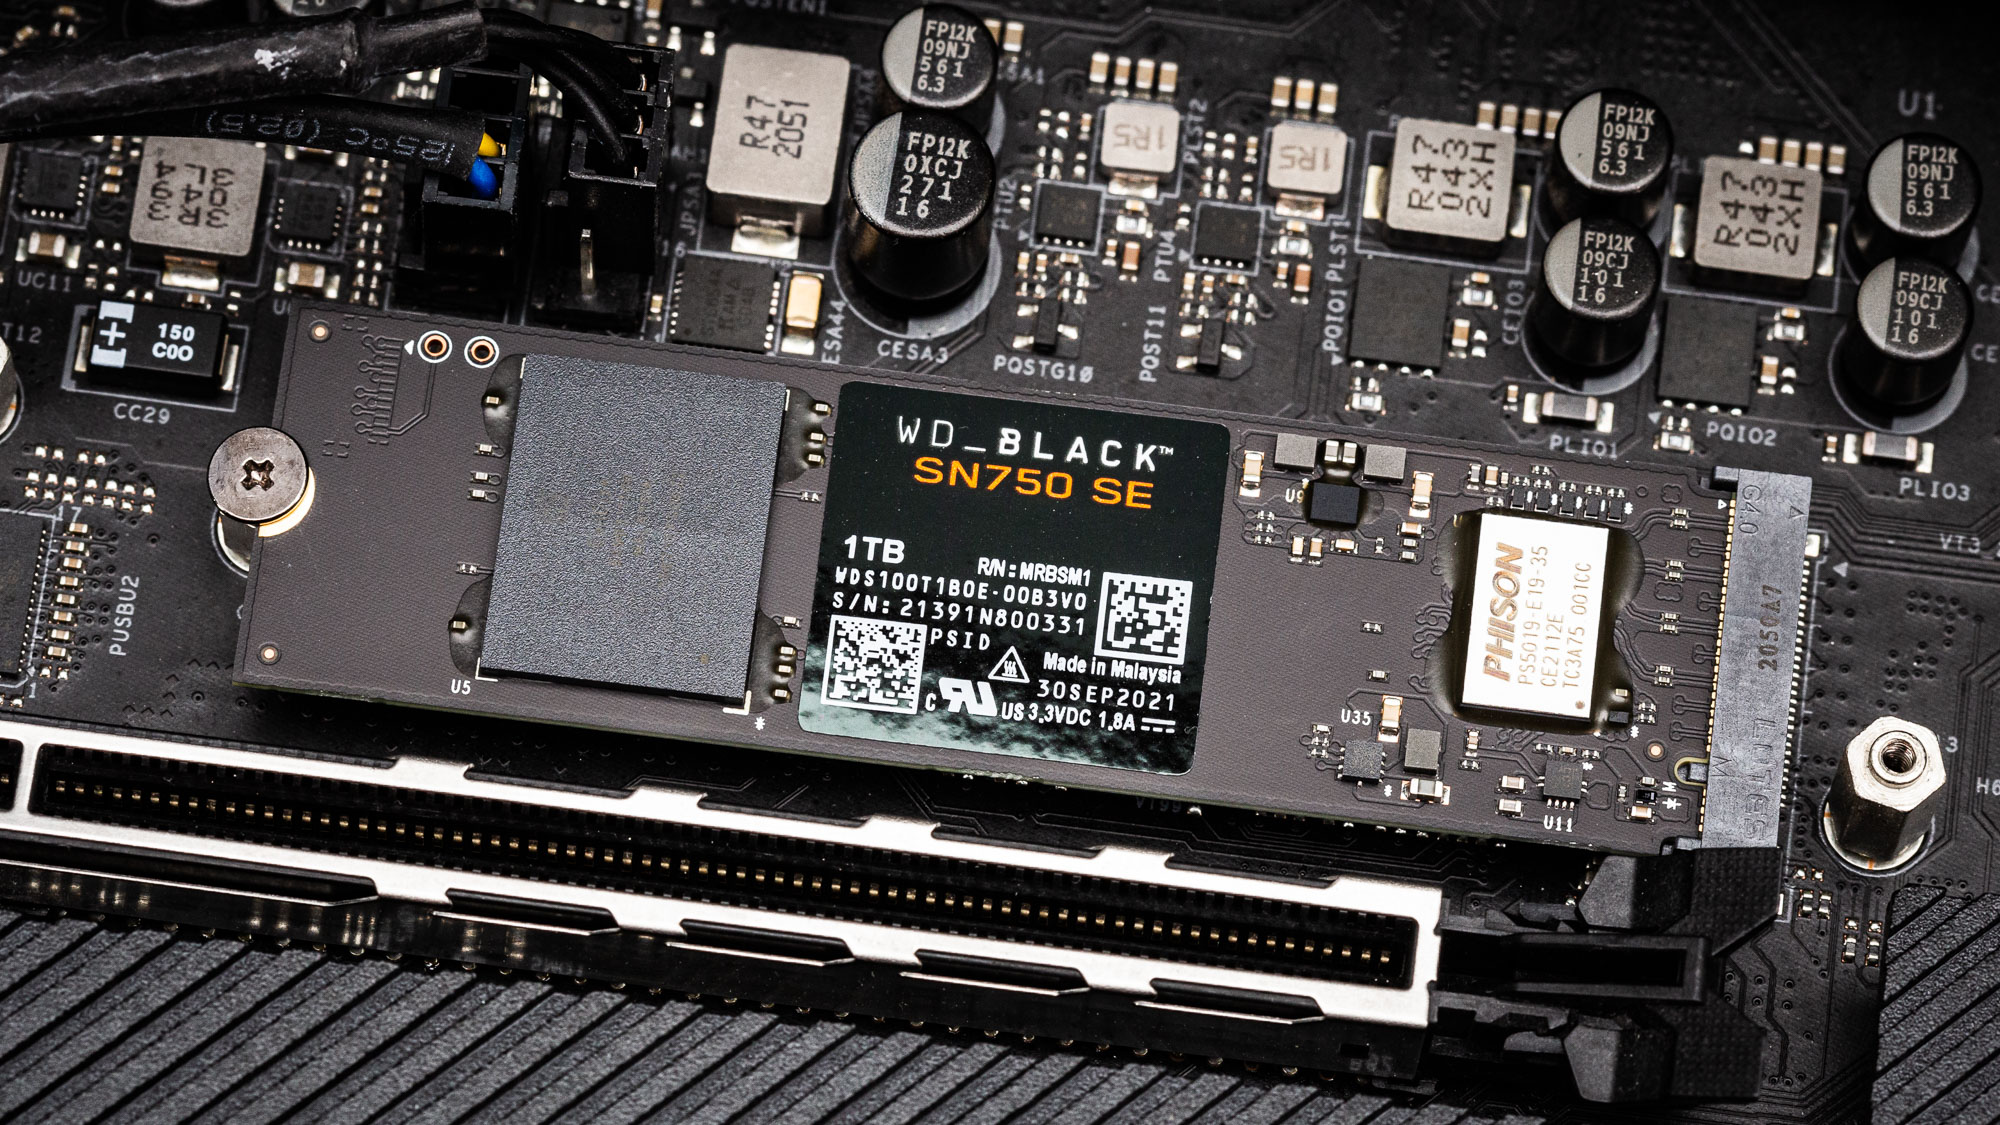 WD Black SN750 SE SSD Review: Cost-Effective Storage for Gamers